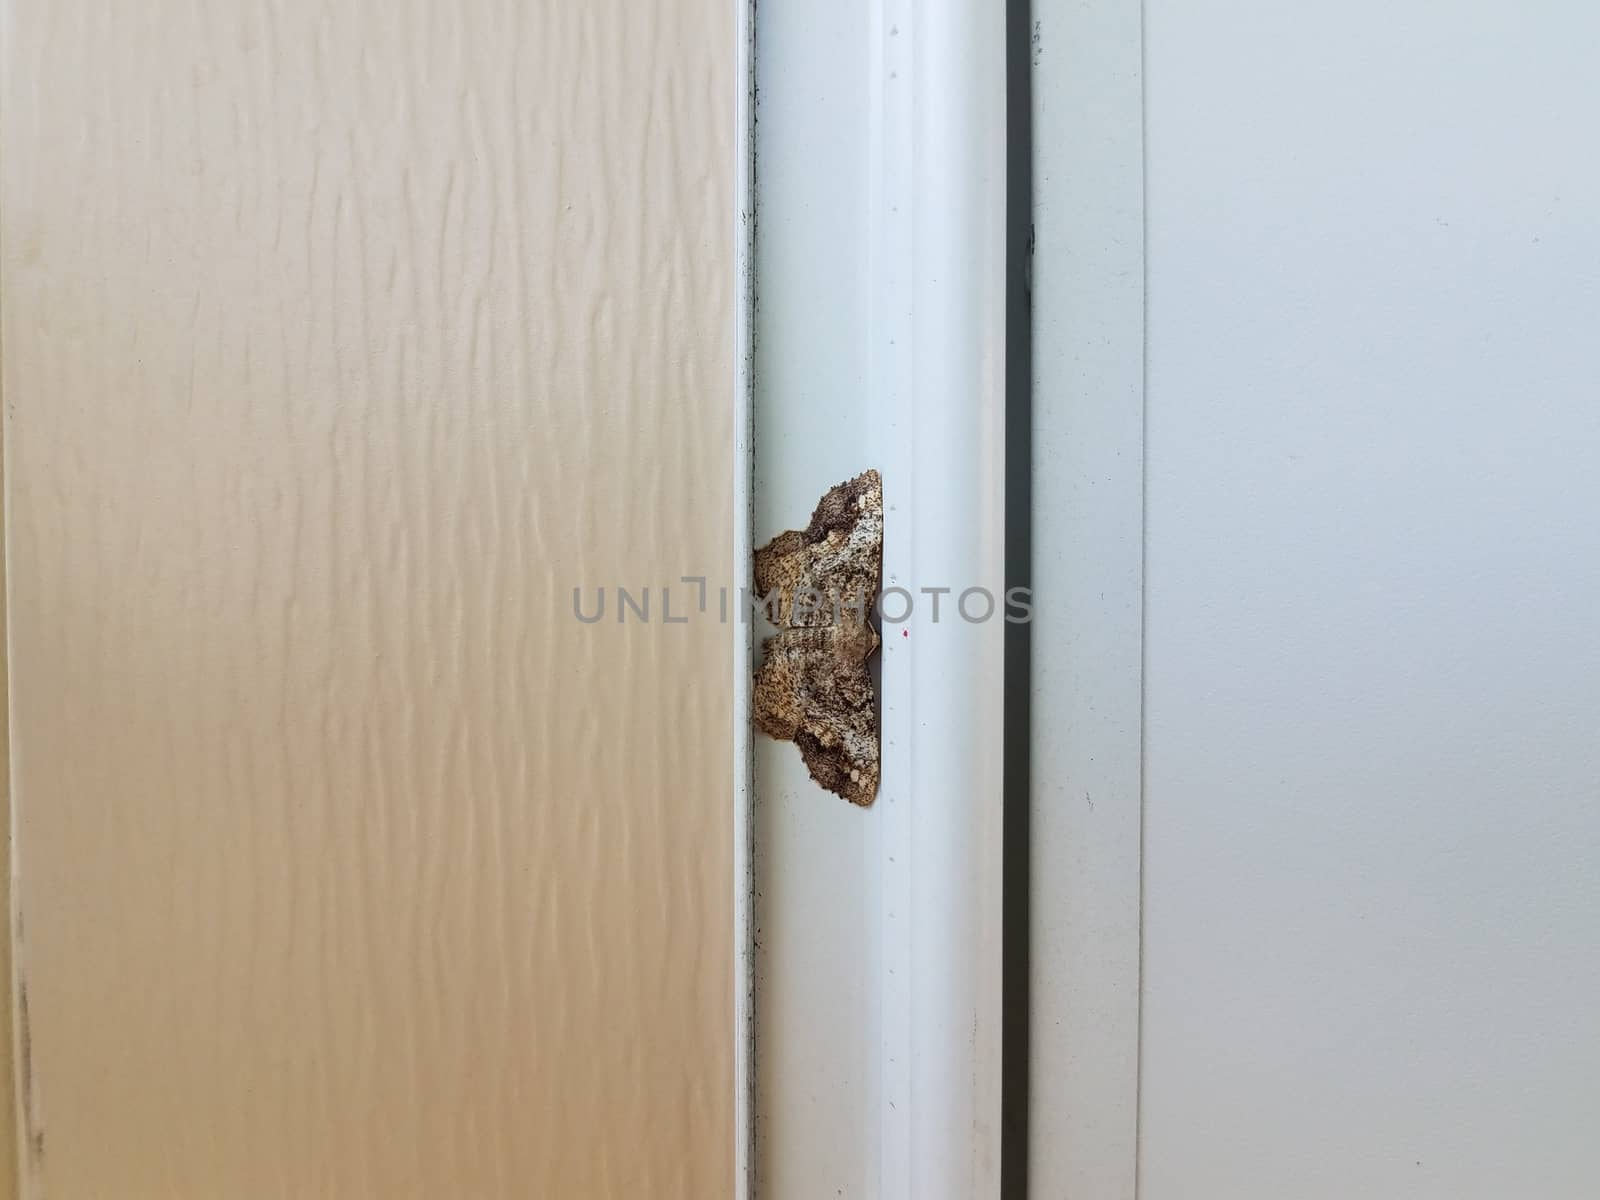 brown and grey moth insect with wings on white house siding by stockphotofan1